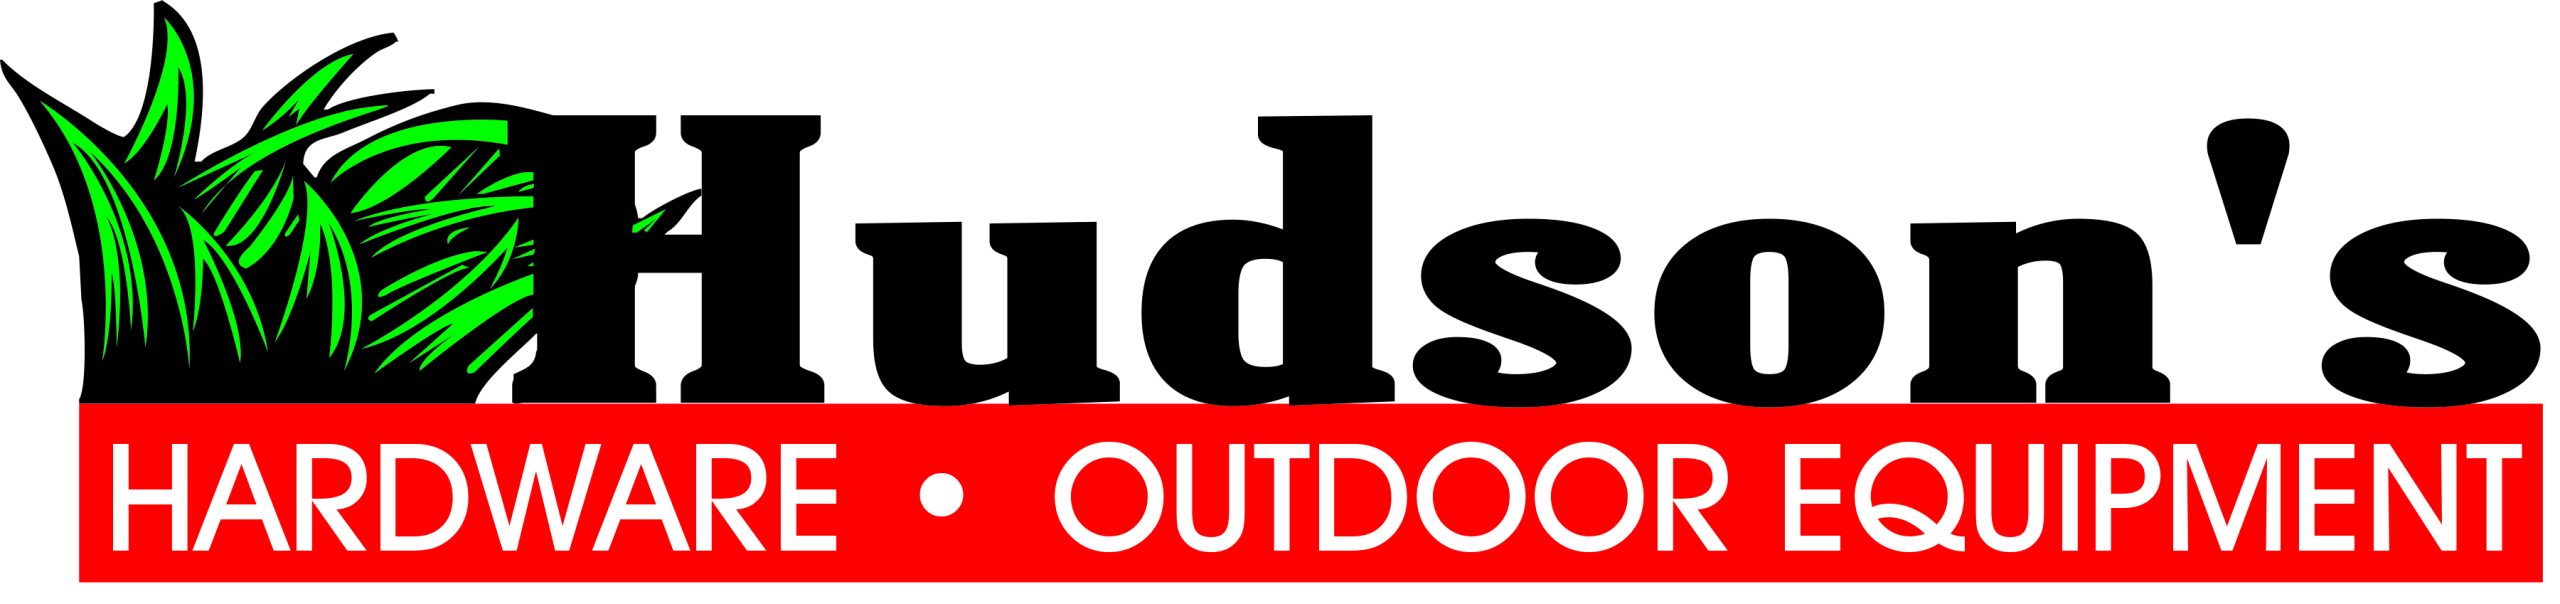 Hudson's Hardware and Outdoor Equipment